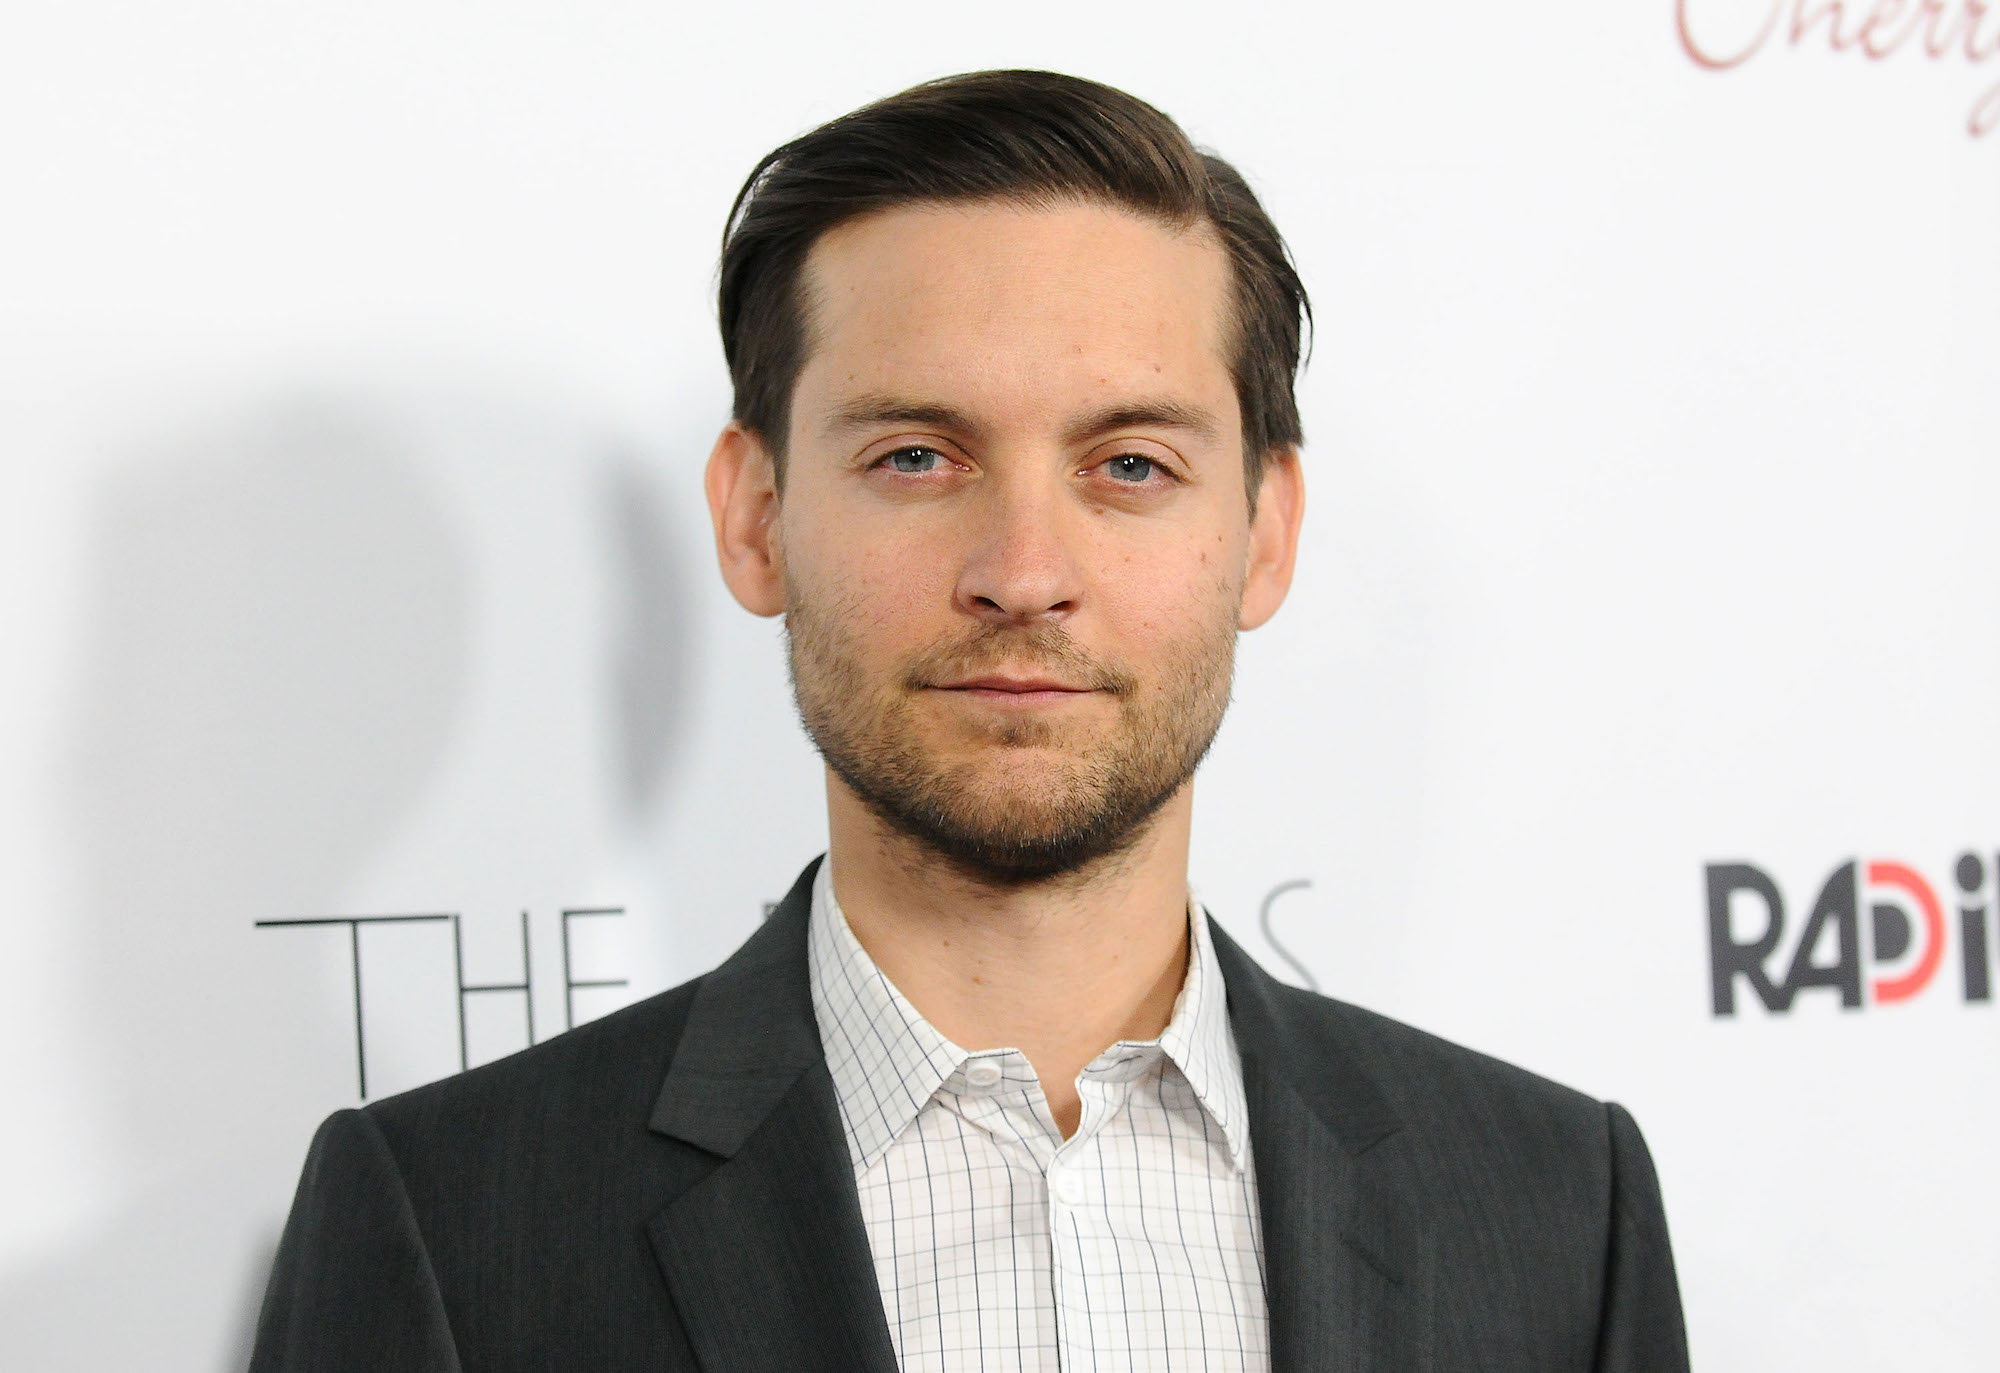 Tobey Maguire smiling in front of a white background